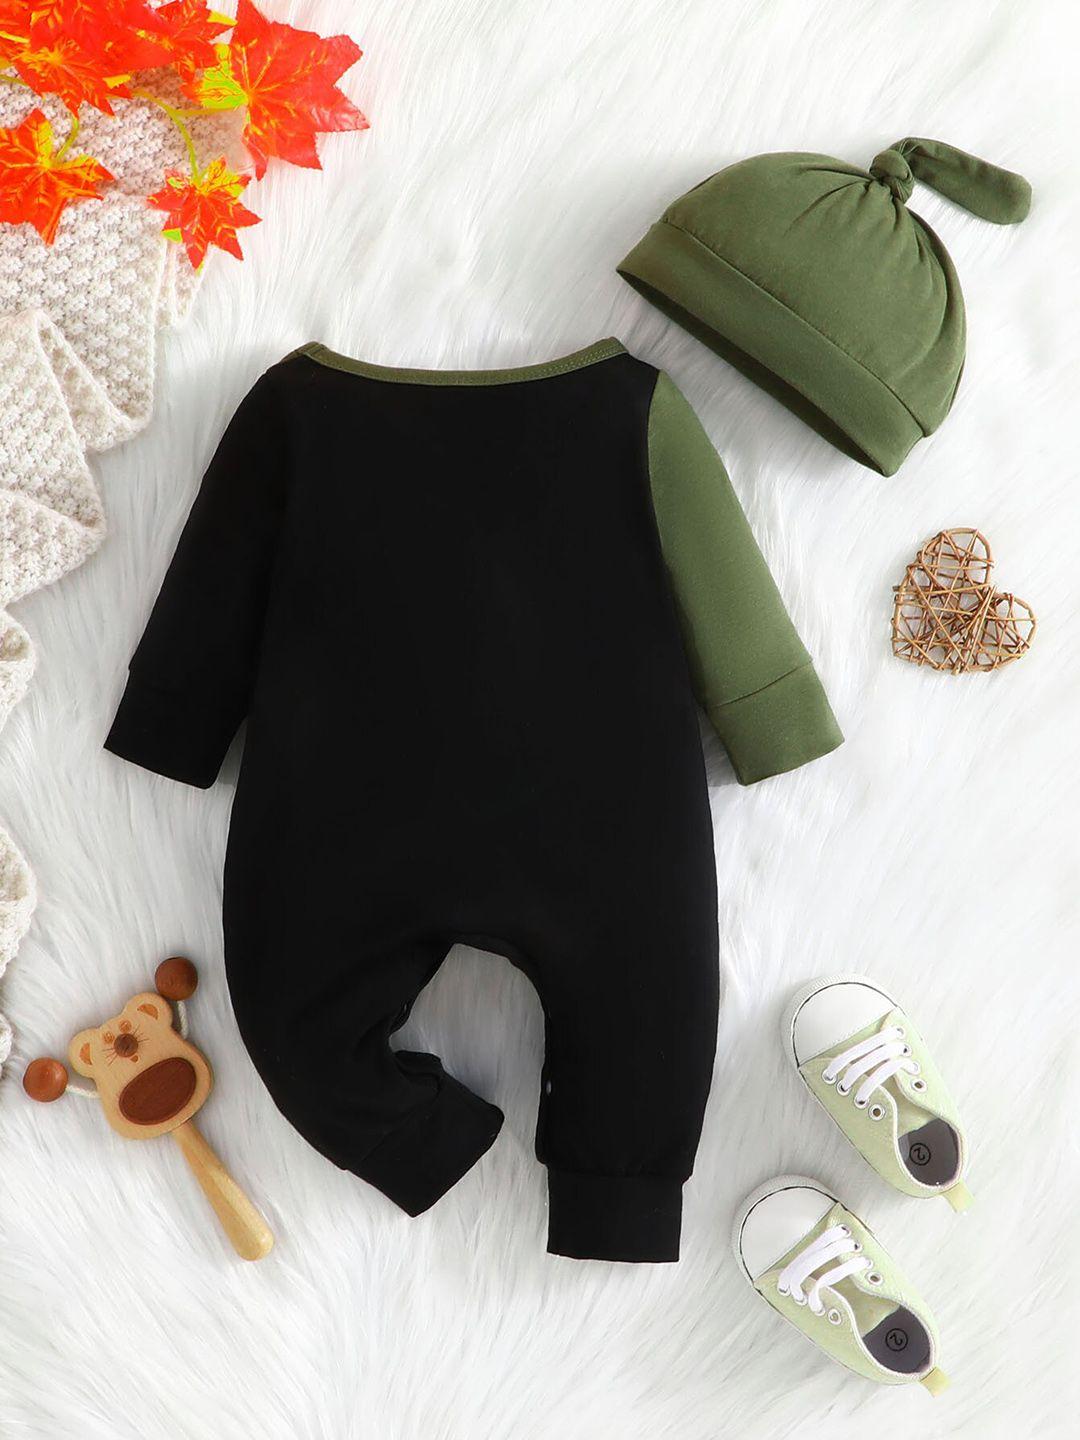 stylecast-infants-romper-with-cap